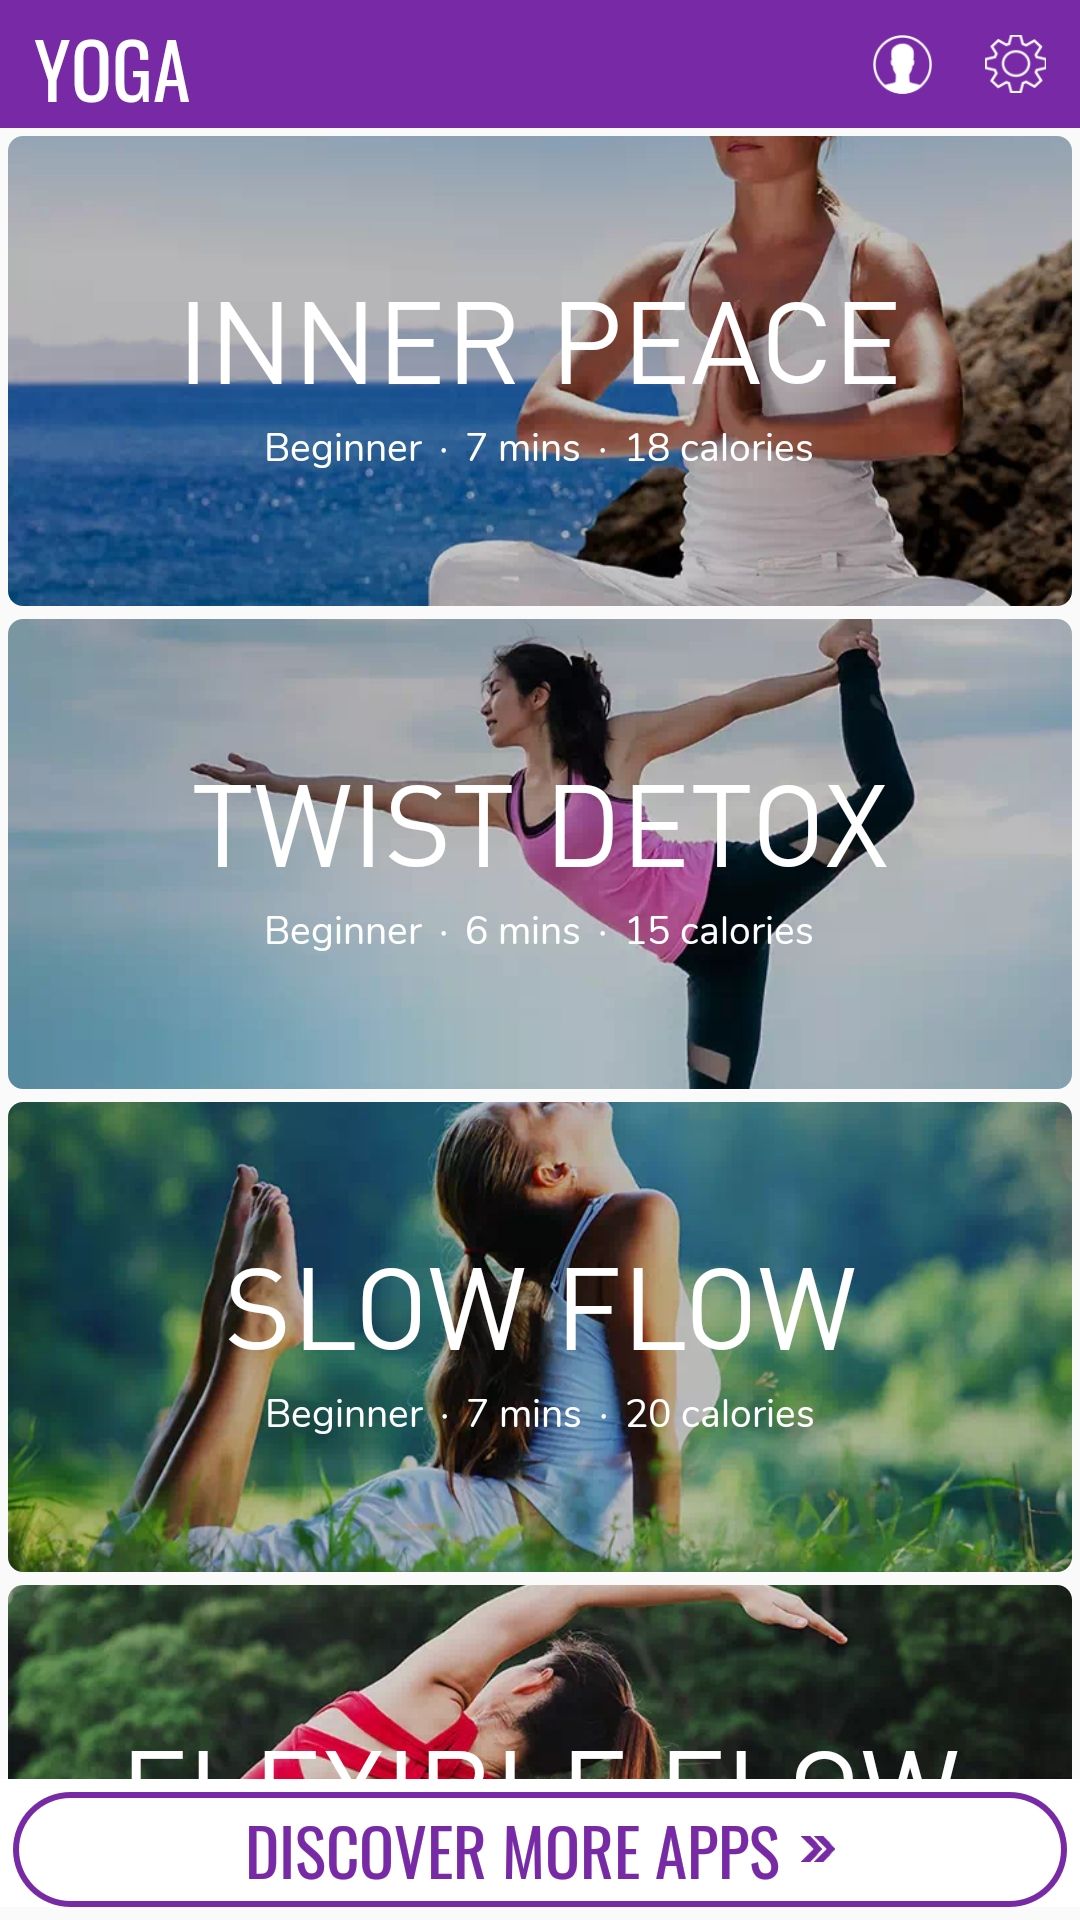 10 Yoga Apps That Will Help You Work Out Anywhere